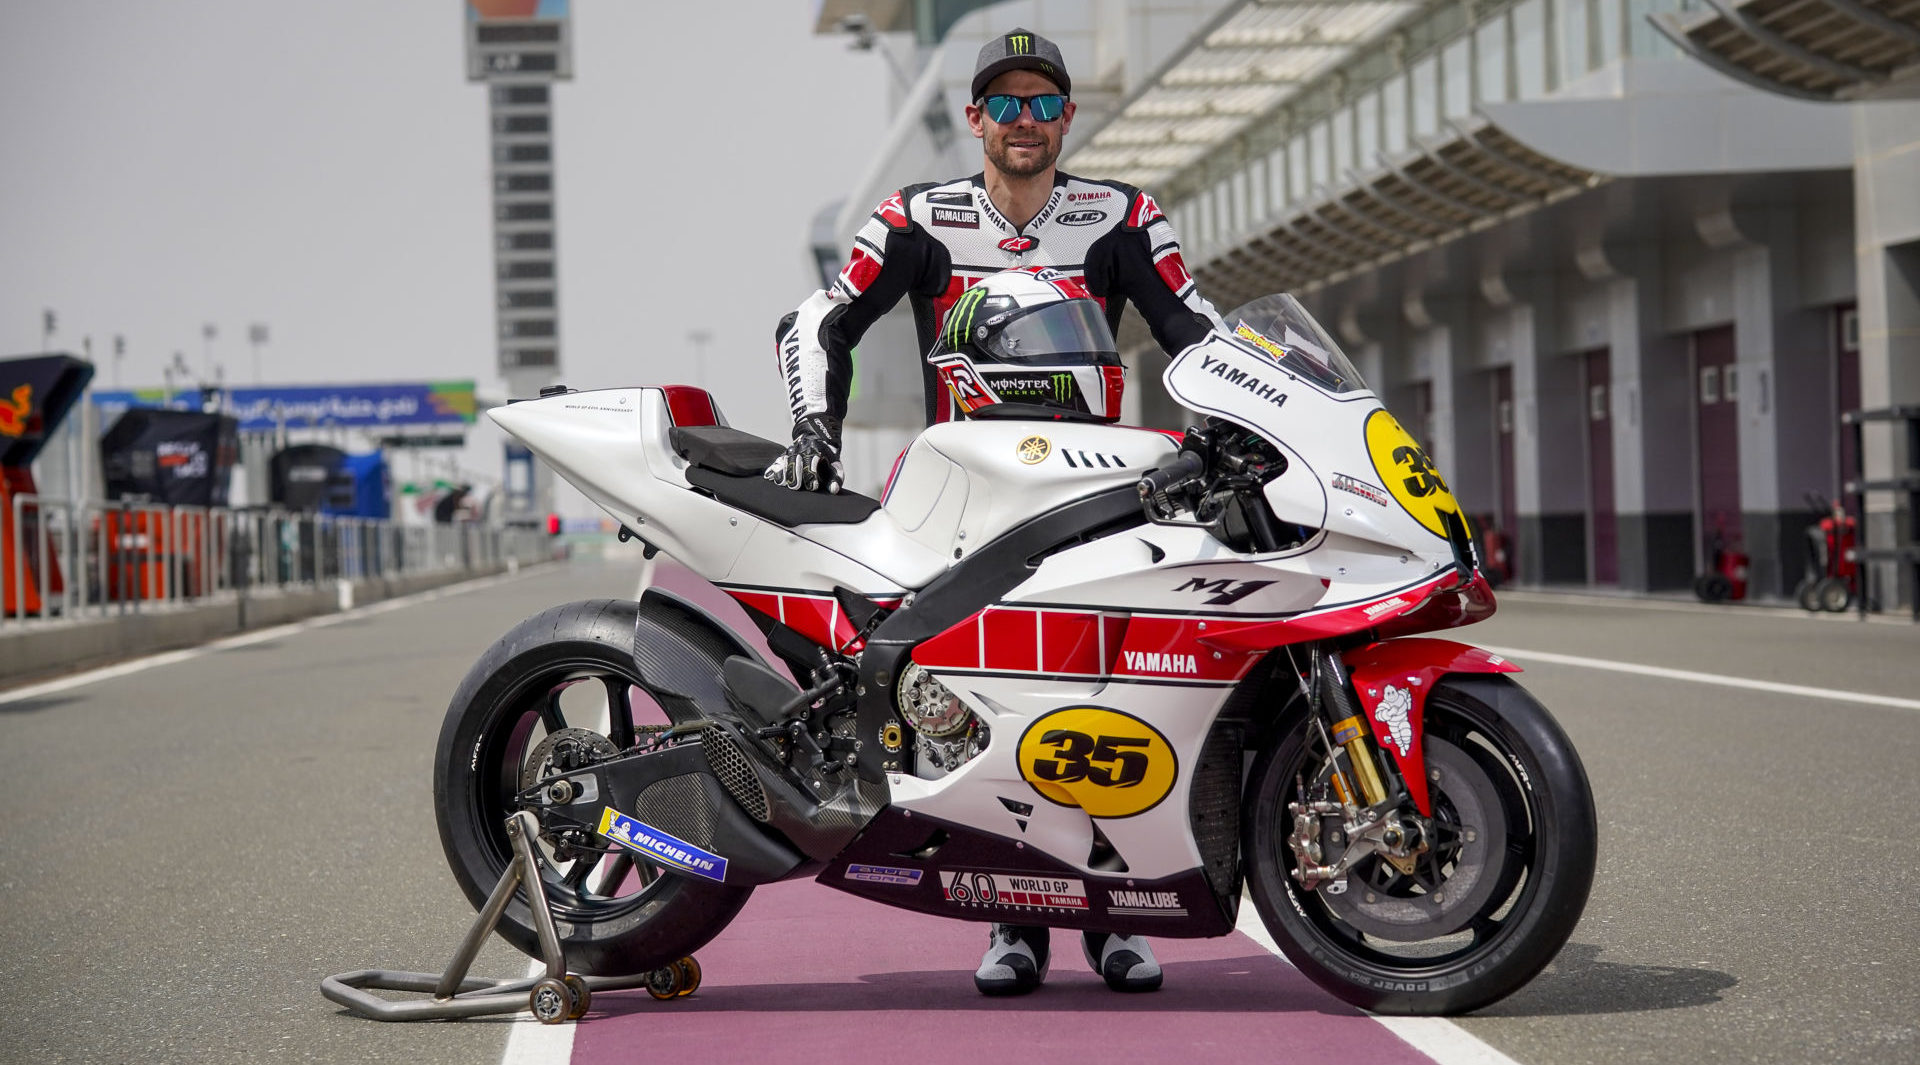 Yamaha MotoGP test rider Cal Crutchlow and his YZR-M1 in special livery to celebrate Yamaha's 60th anniversary in Grand Prix racing. Photo courtesy Yamaha.